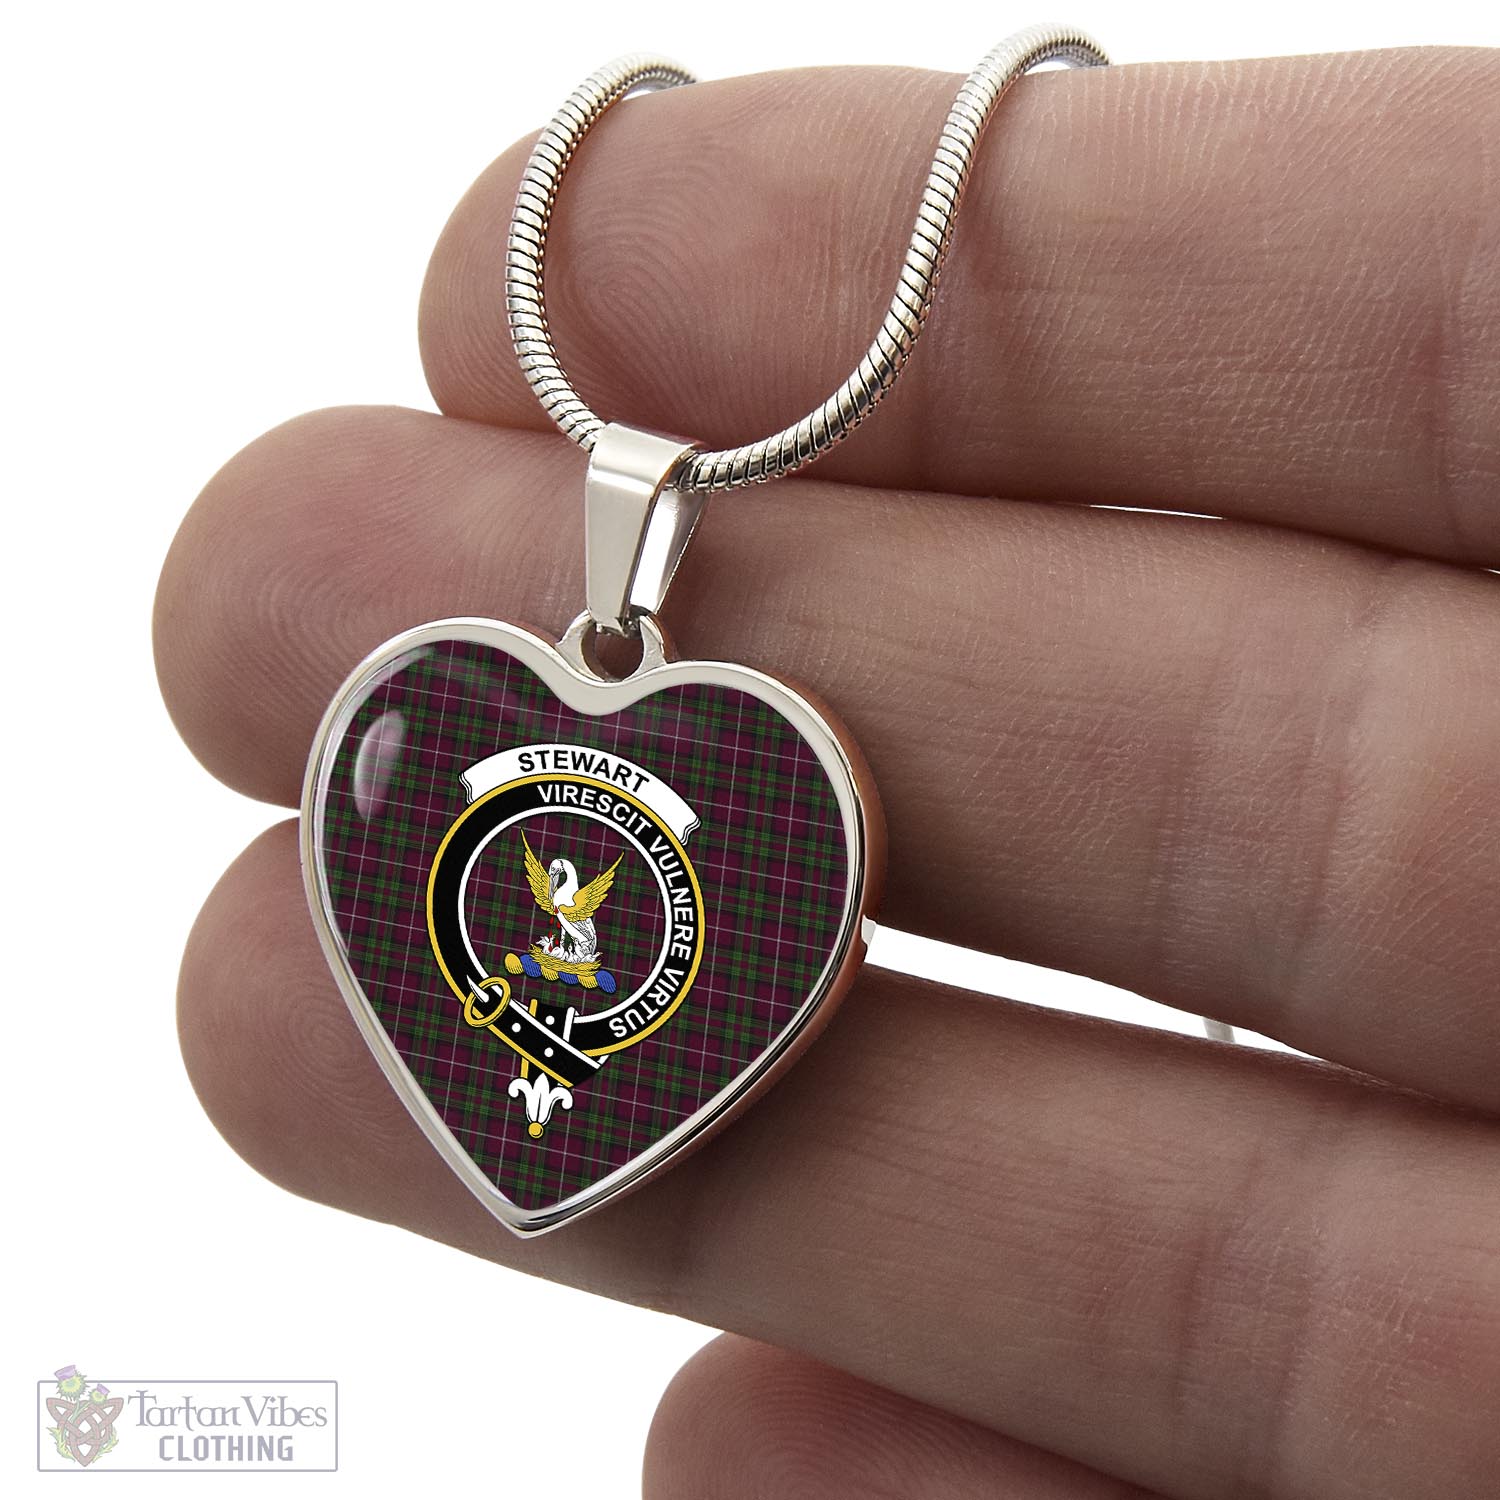 Tartan Vibes Clothing Stewart of Bute Hunting Tartan Heart Necklace with Family Crest